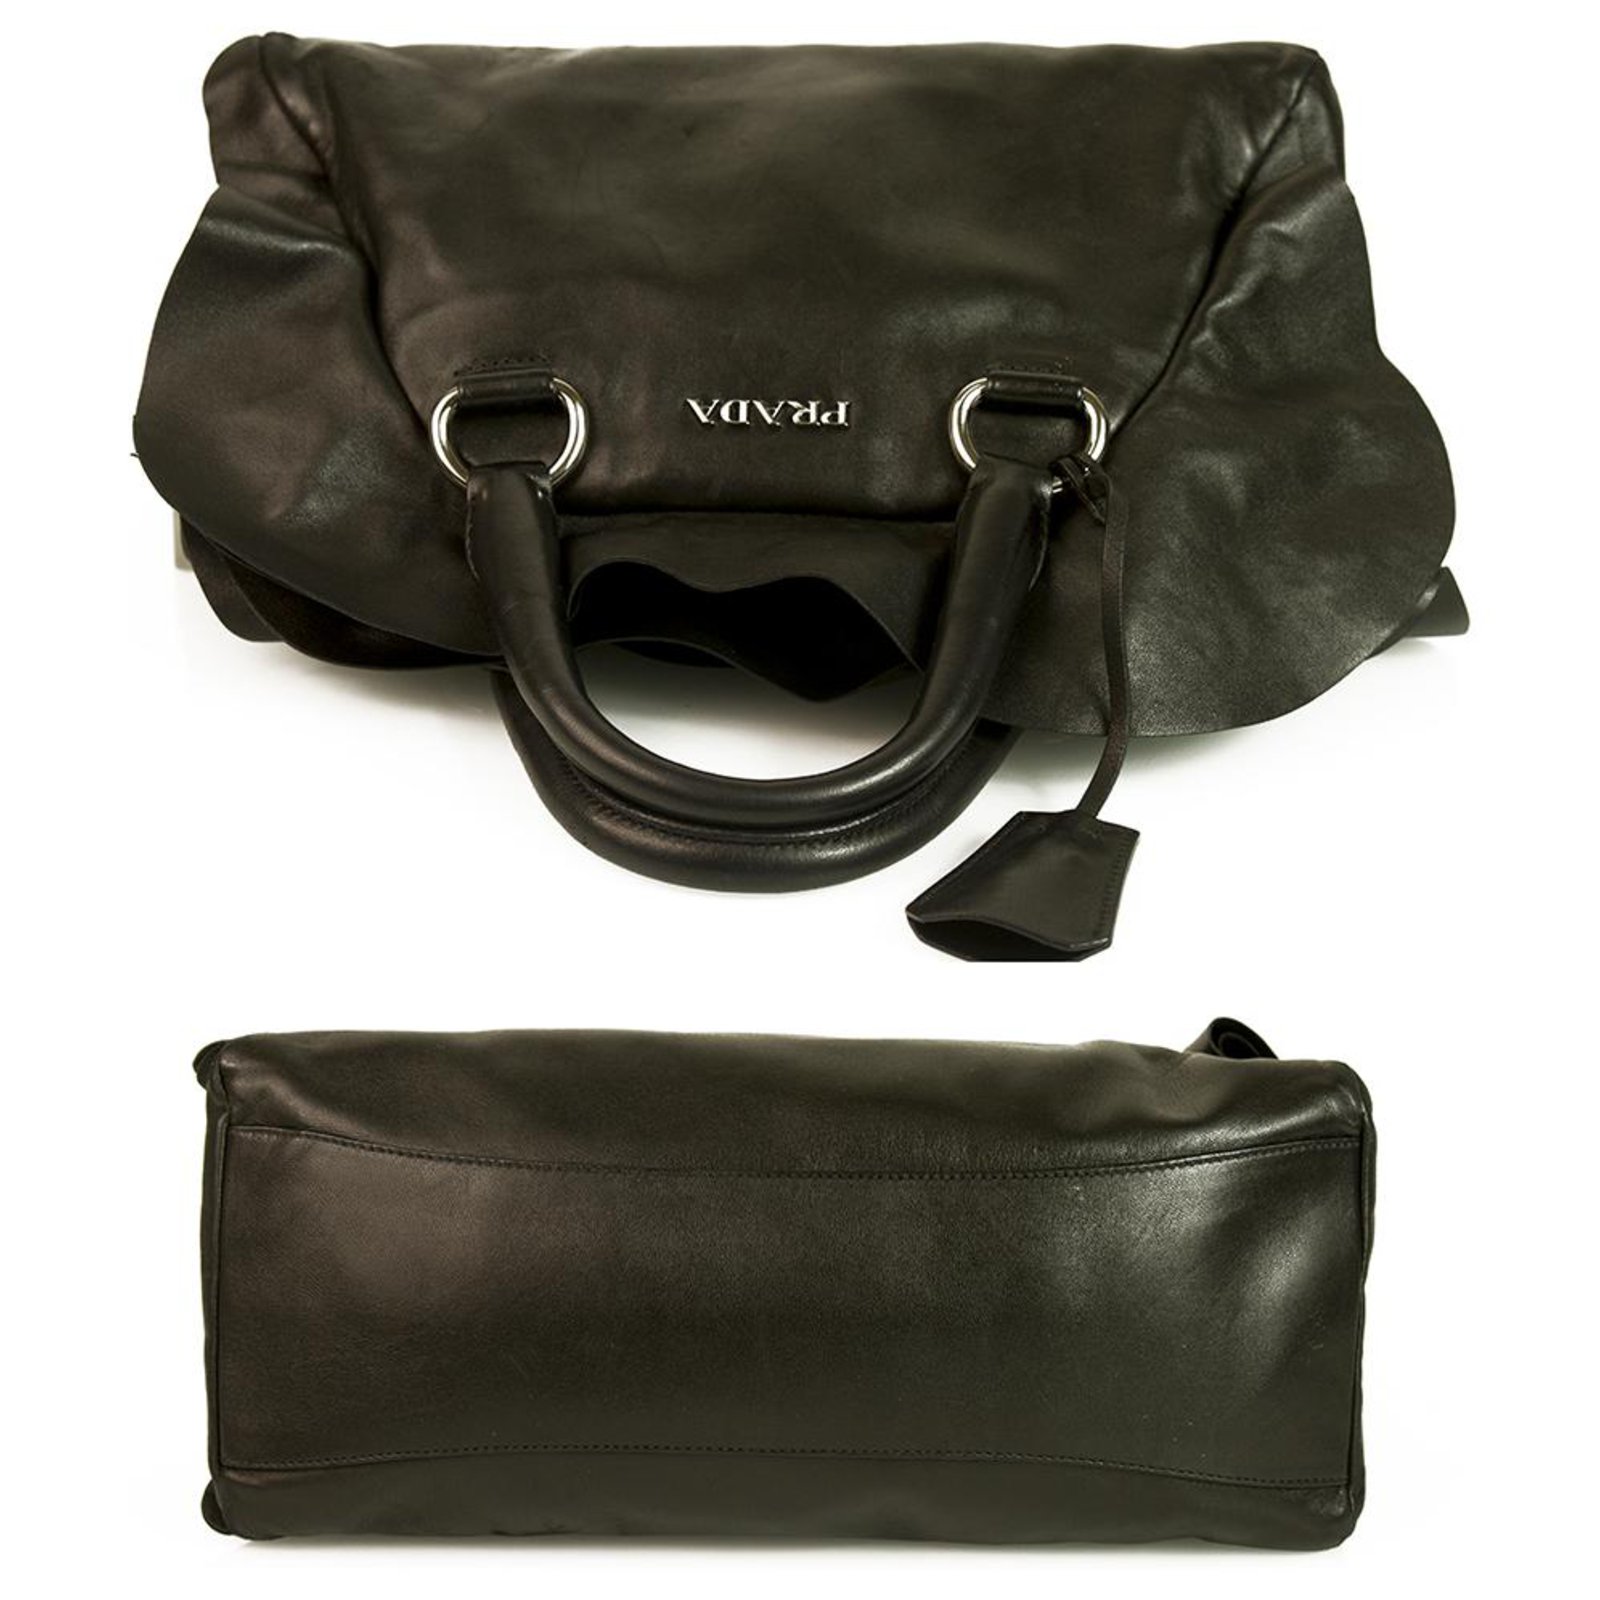 PRADA RUFFLE NAPPA BAULETTO BAG, black leather with silver tone hardware,  double top handles, zip closure at the top, pleated ruffled details at the  top, with authenticity card and dust bag, 40cm